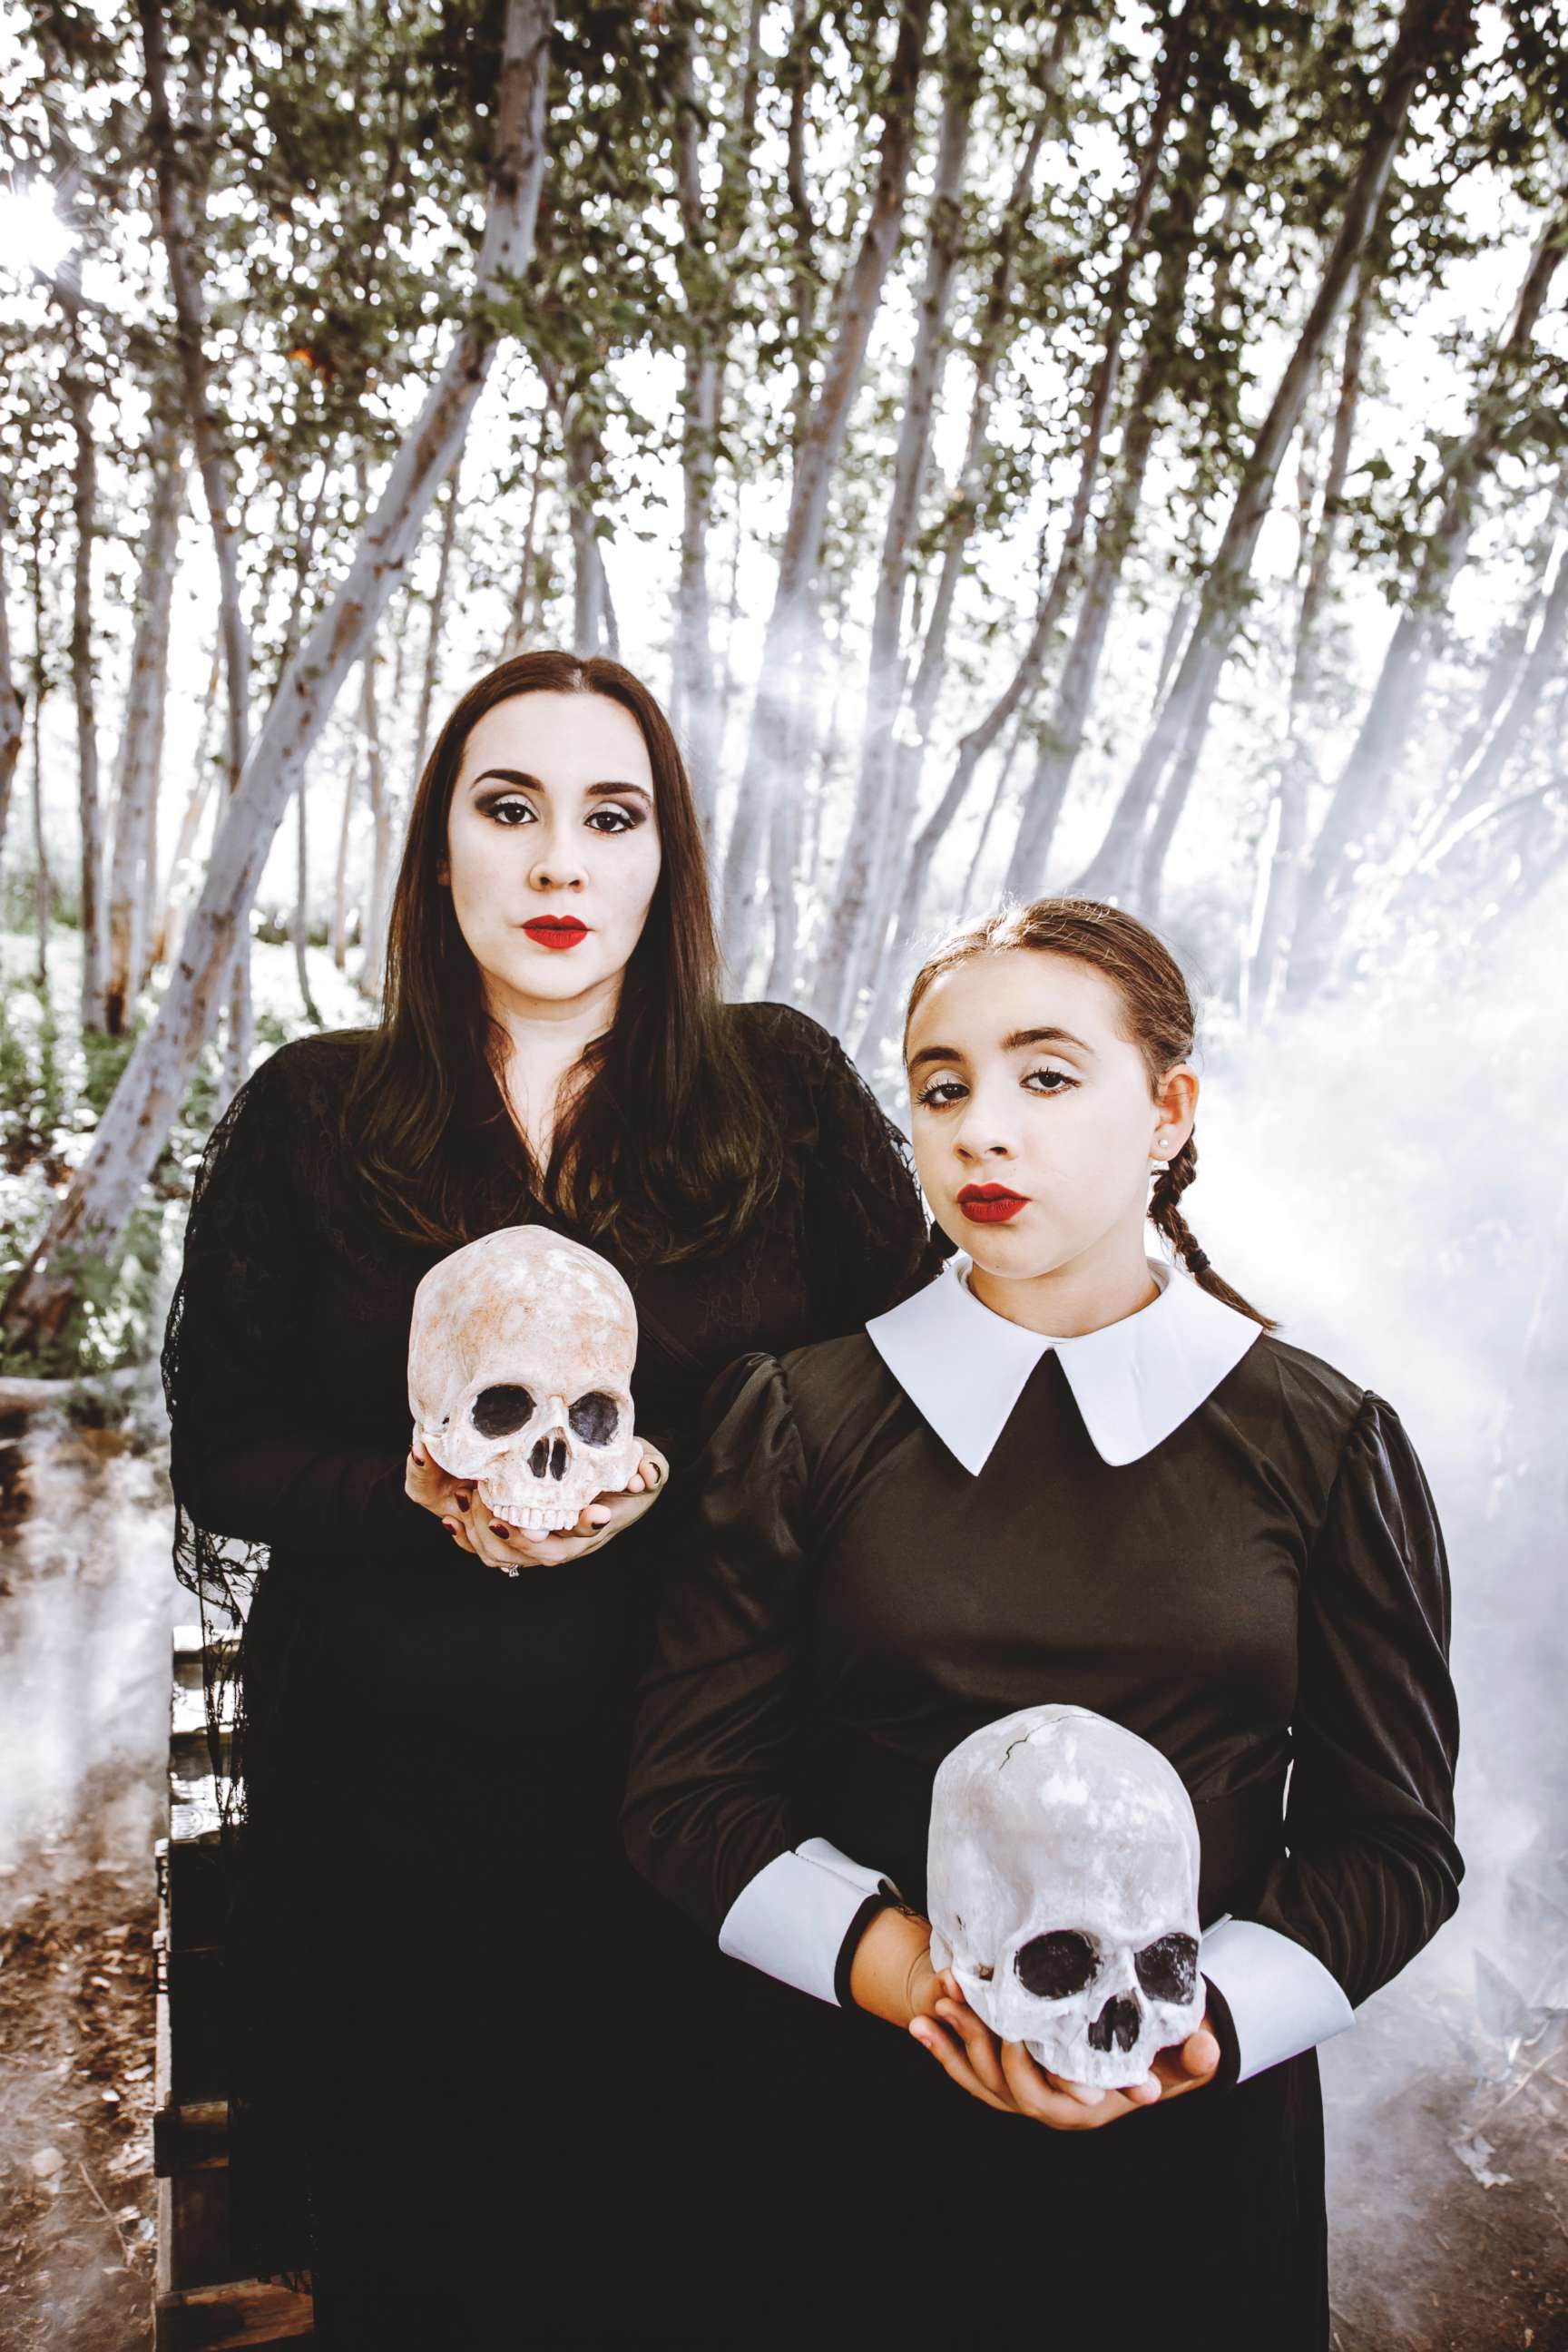 PHOTO: Michelle Basteen and her daughter, Madison, pose as Morticia and Wednesday Addams.